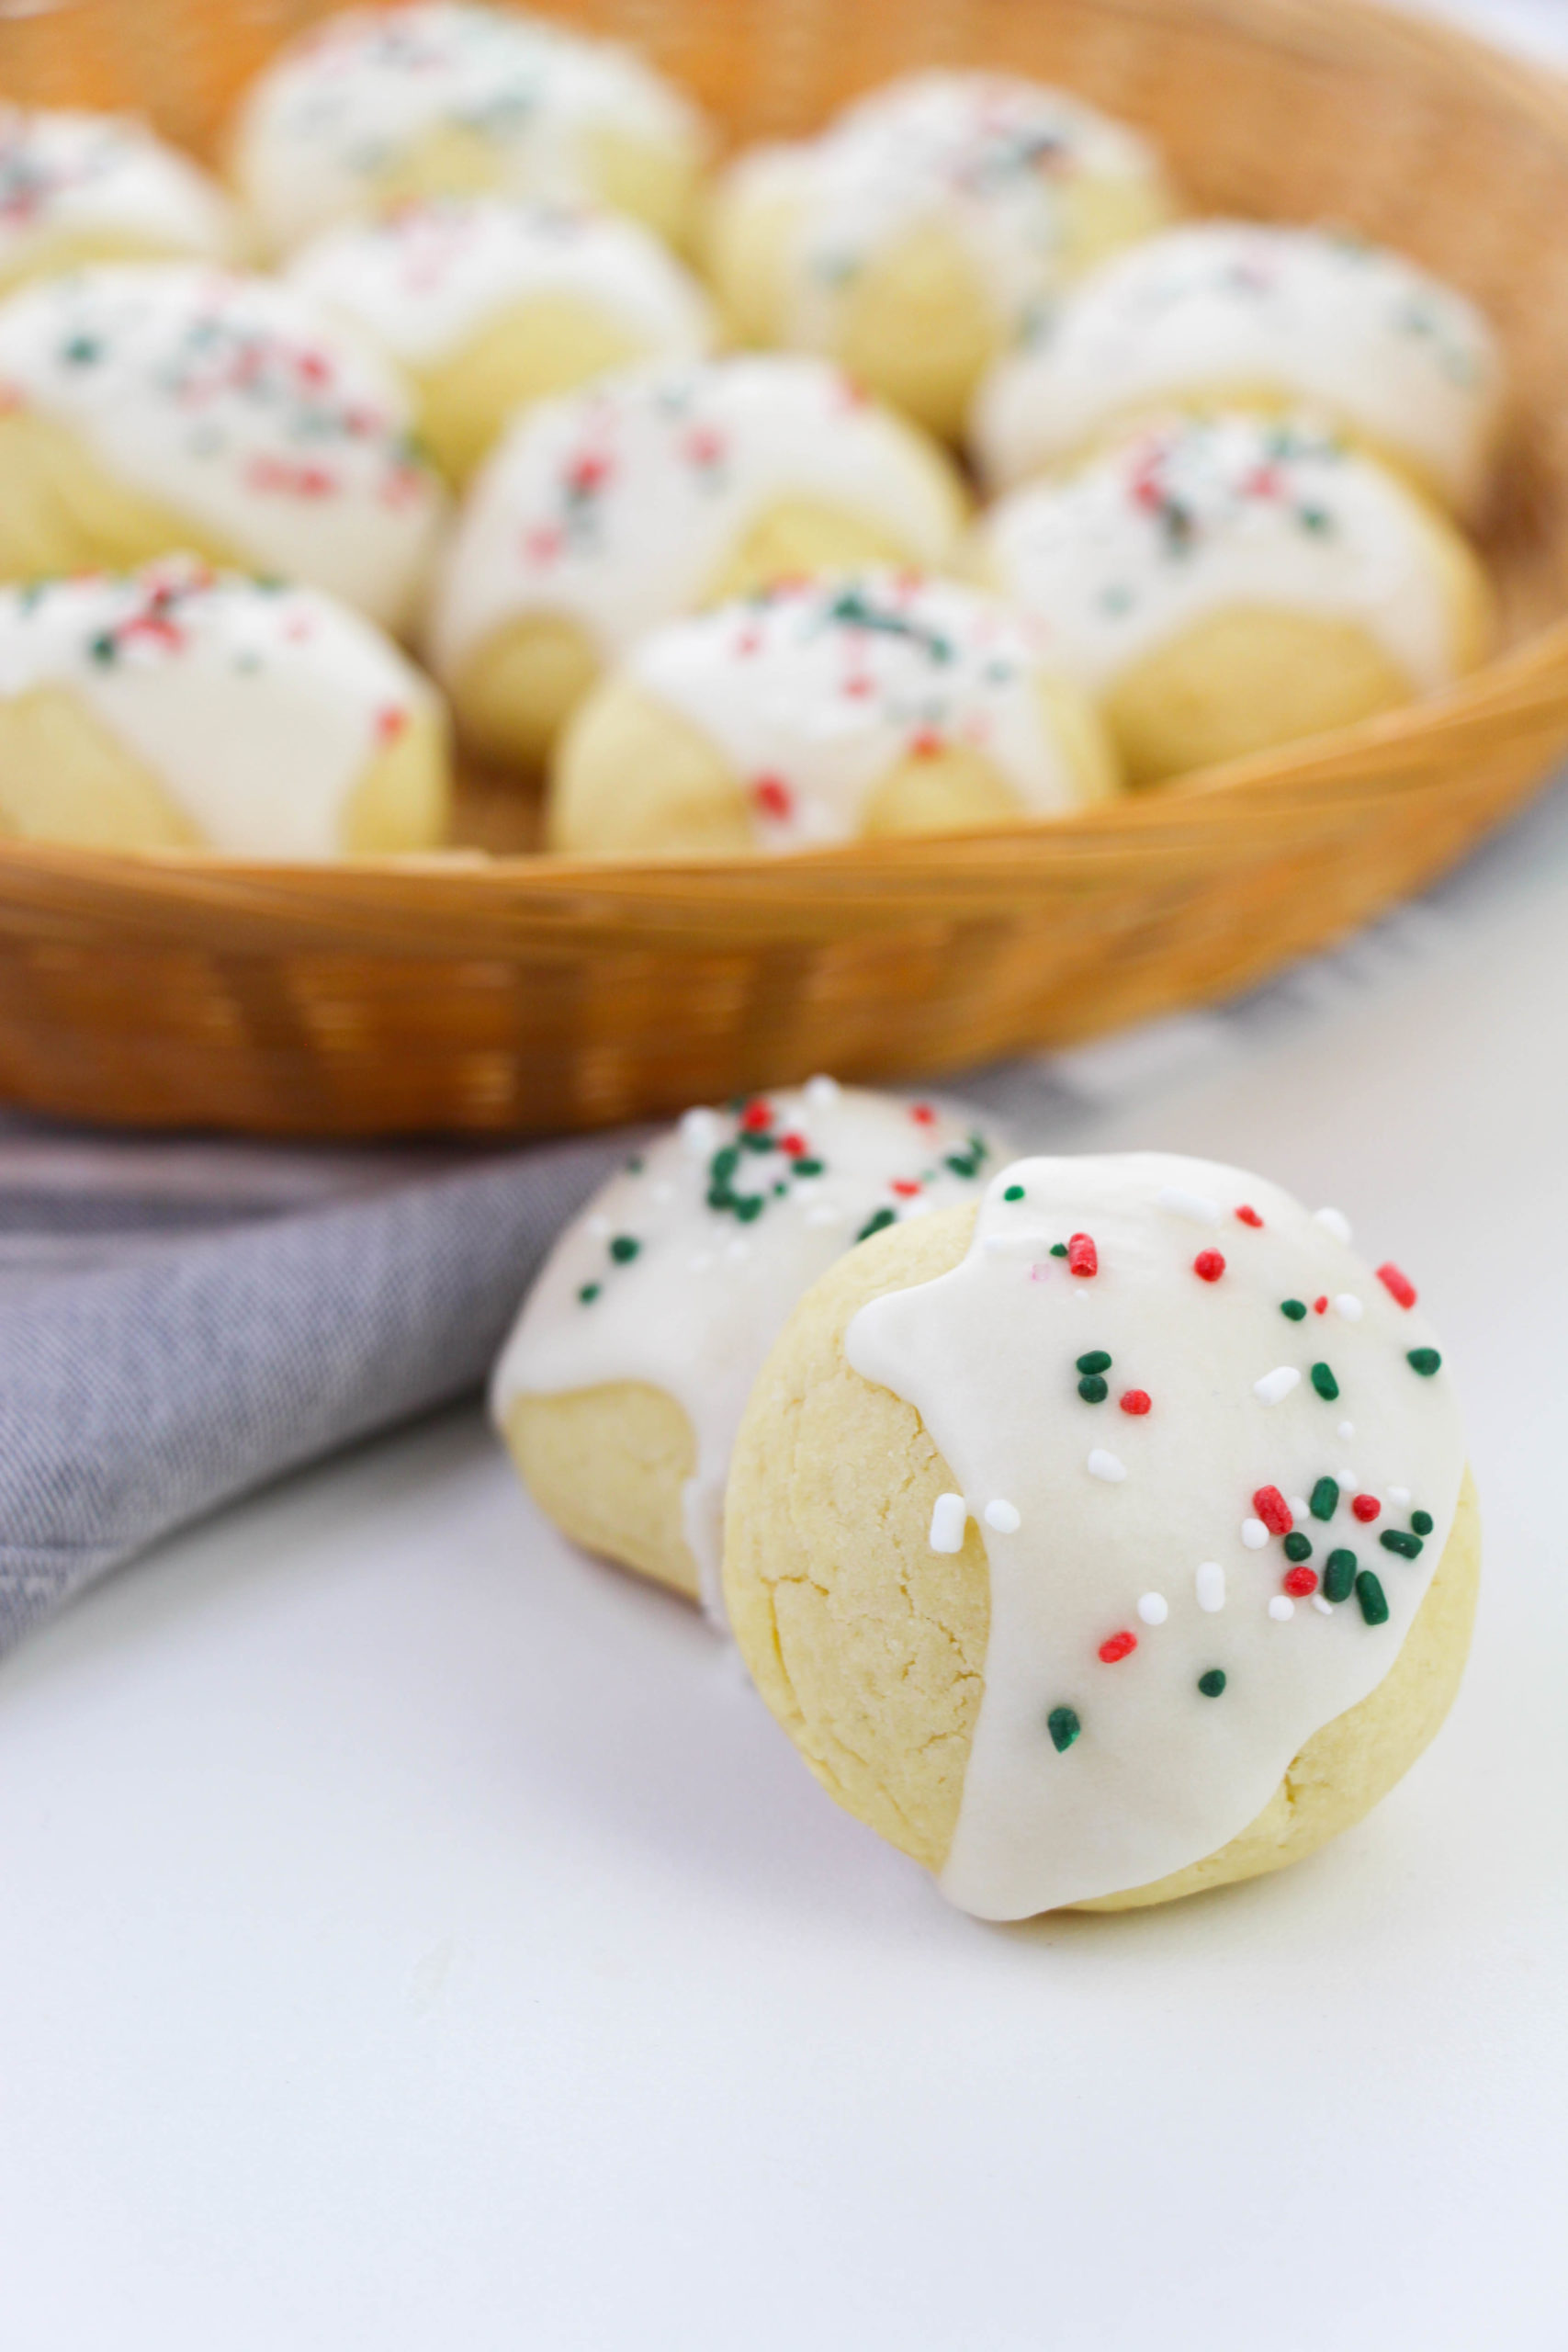 Two Italian Wedding Cookies outside a bowl of additional cookies.